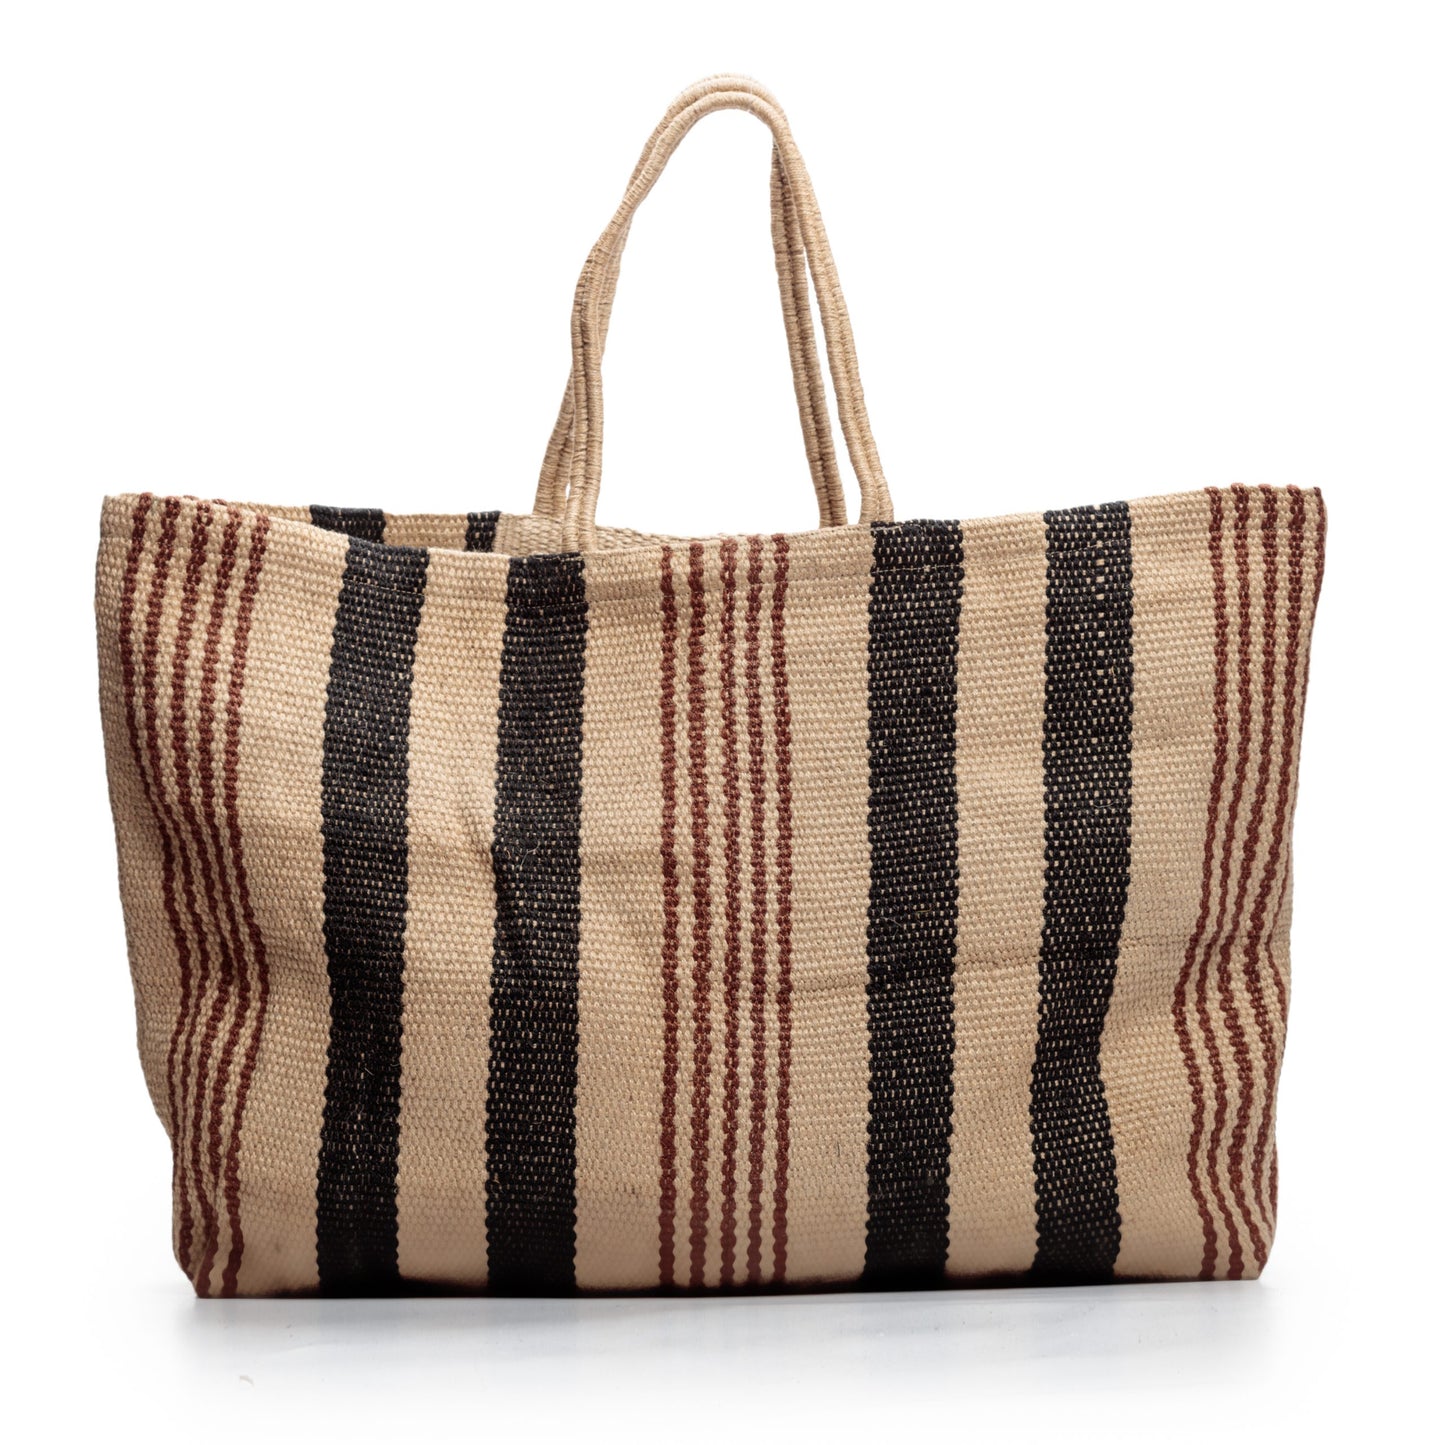 EXTRA LARGE JUTE BAG LONG HANDLES WITH NATURAL, BLACK AND BROWN STRIPES